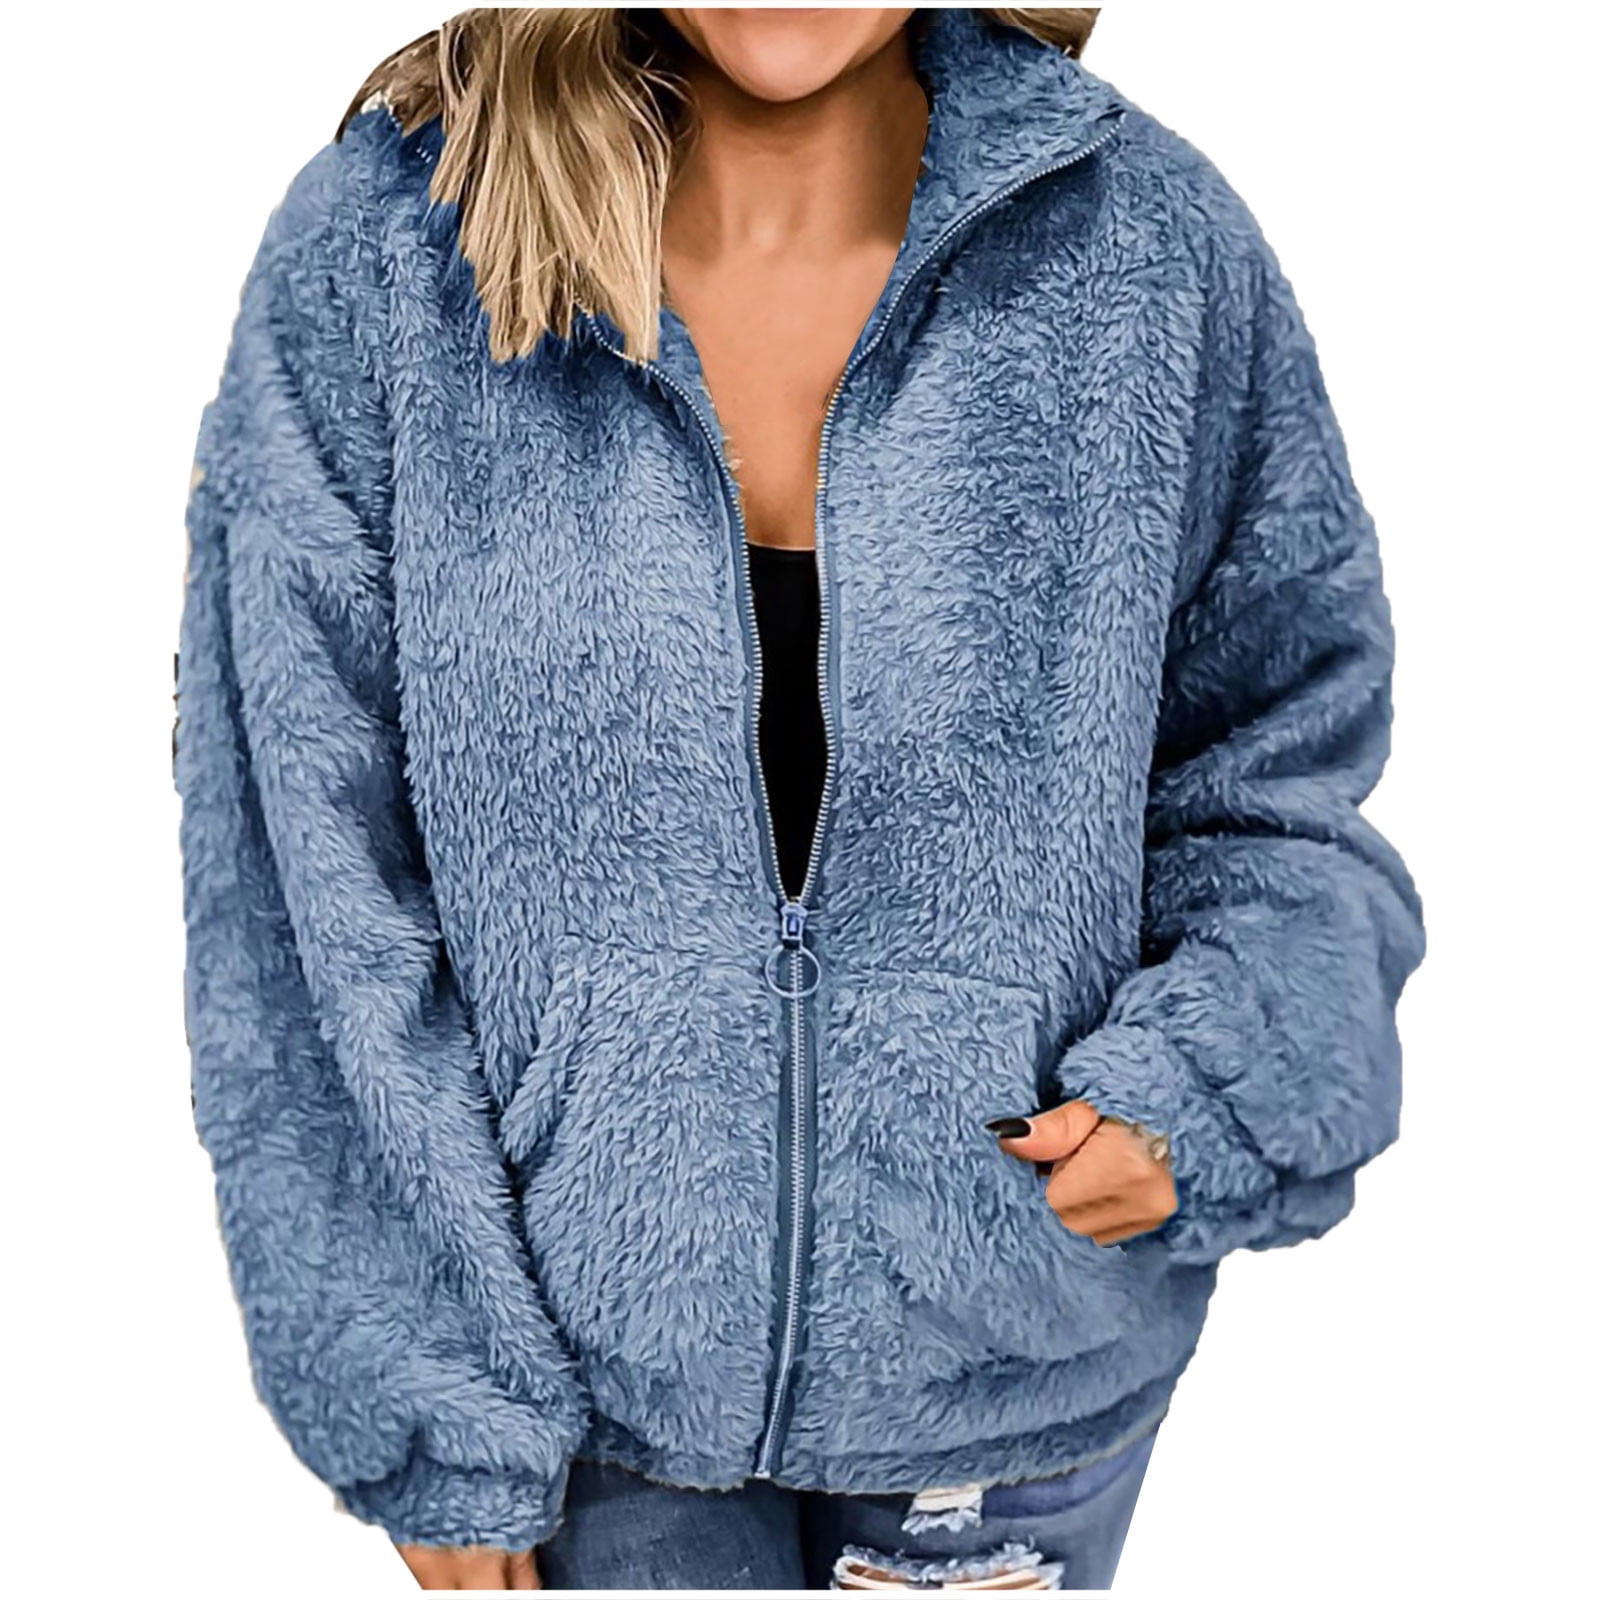 Buy FALTU.CO Women's Zipper Cotton Hooded Hoodies Jacket with Zip & Pocket  Stay Warm and Stylish with Winter Hoodies for Women Trendy Designs  Comfortable Fit and Quality Materials Perfect for Cold Weather